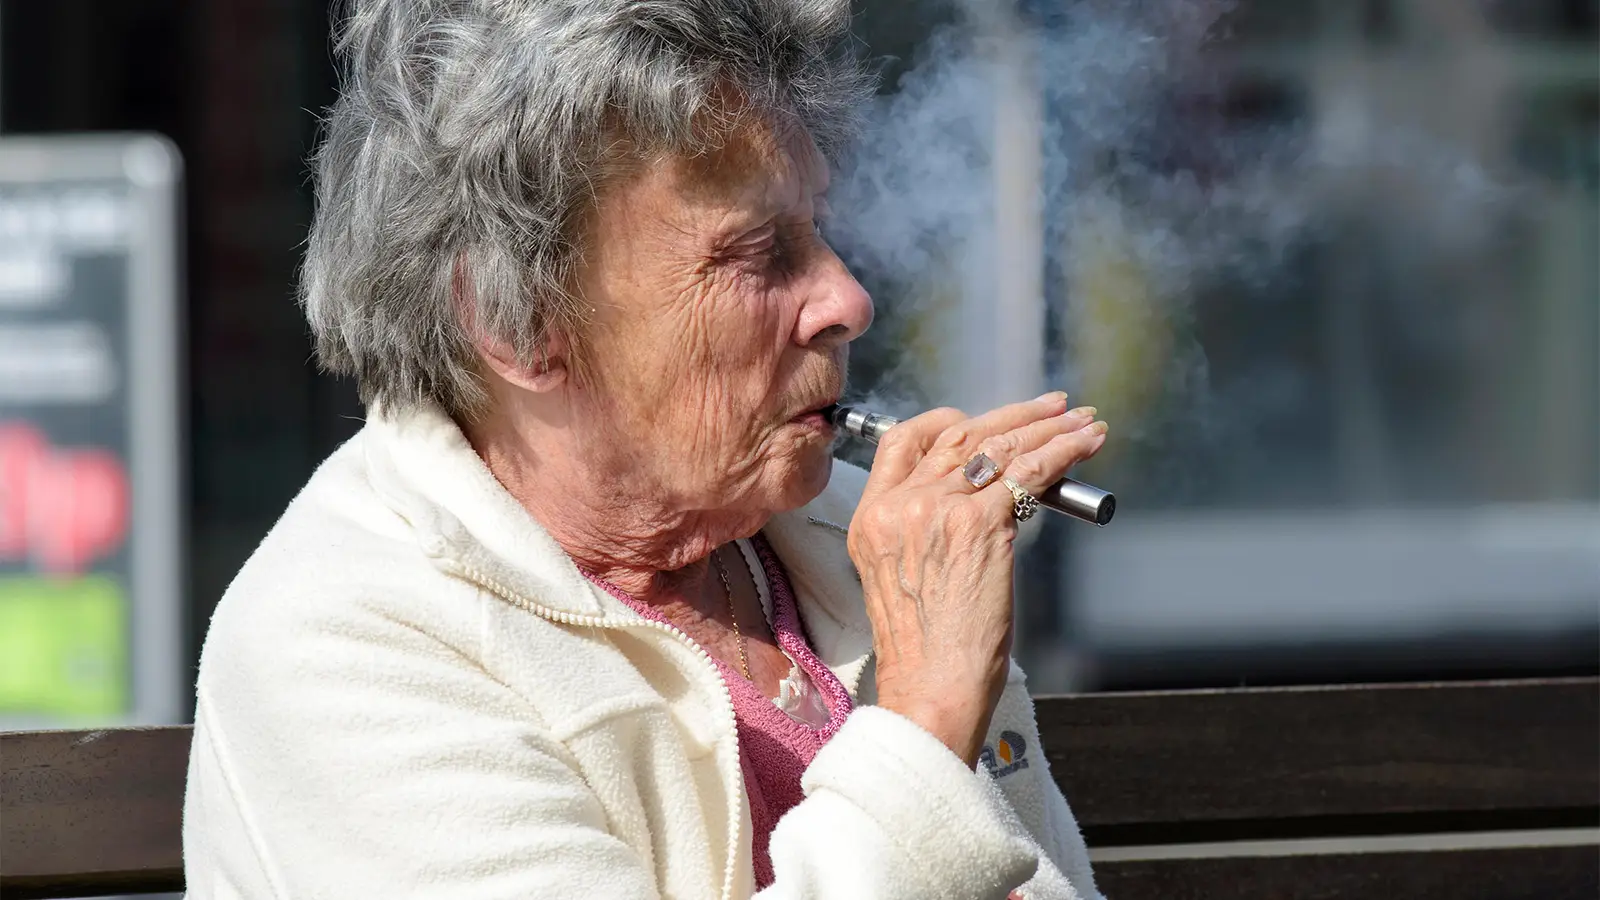 Woman with grey hair holding a vaping device to her lips and inhaling.